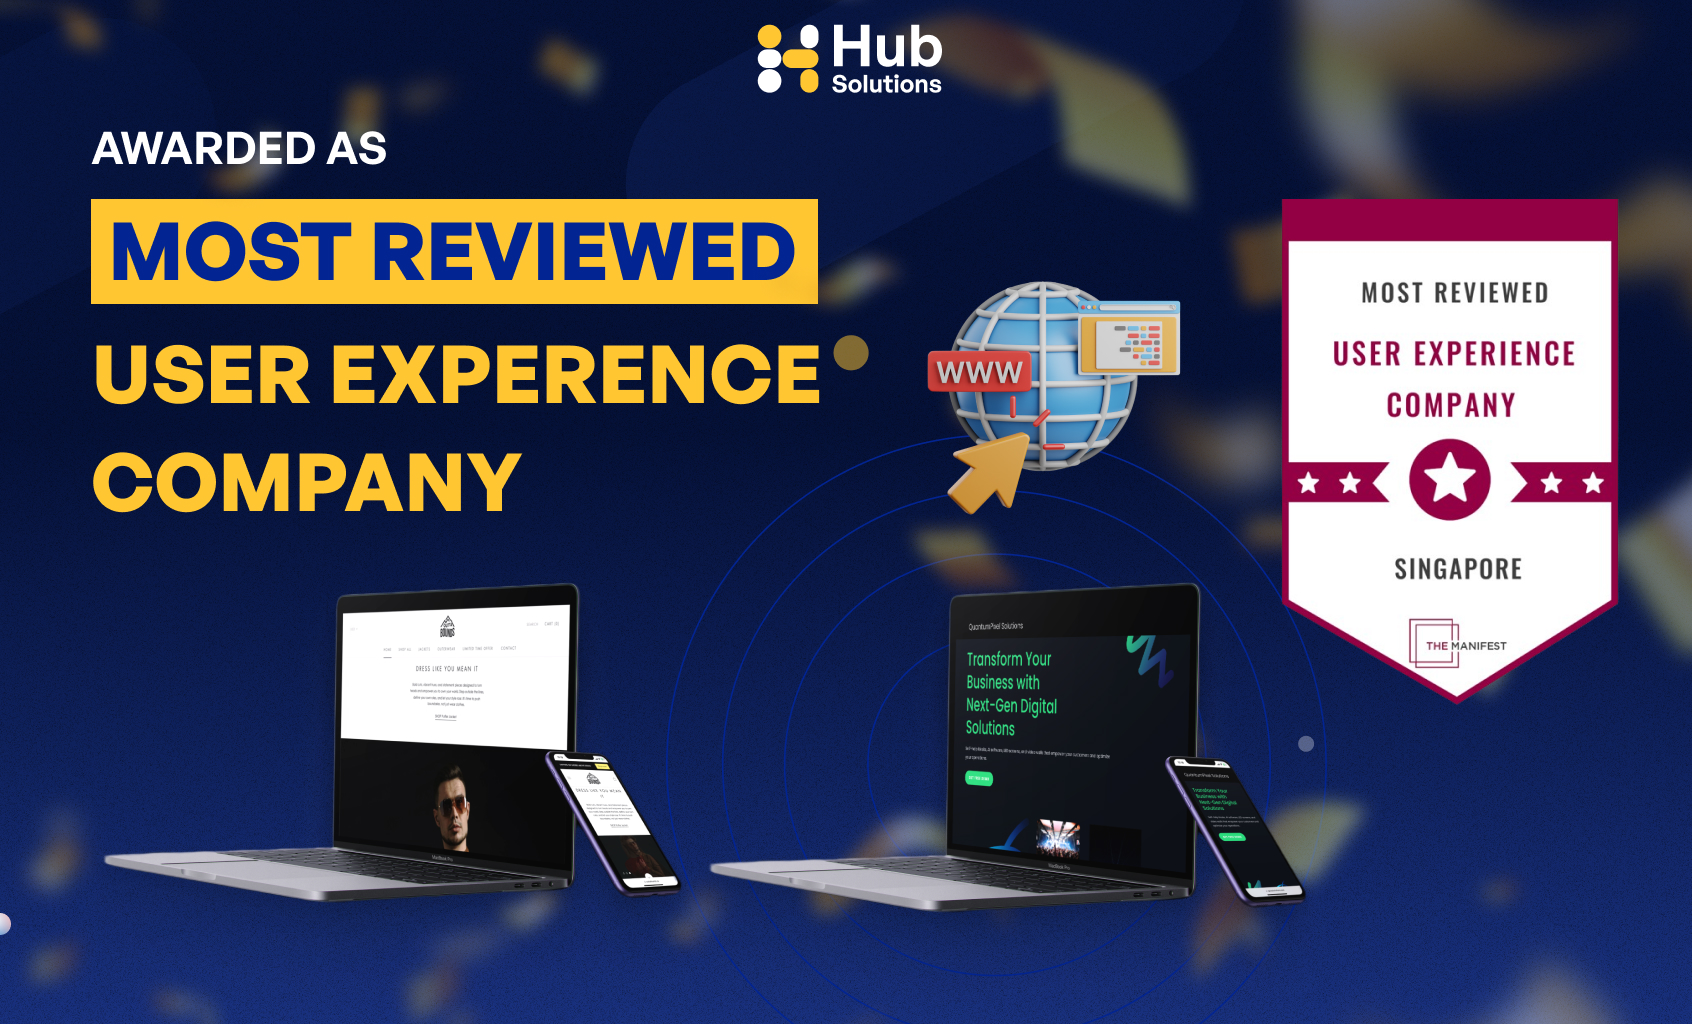 Hub Solutions Team Celebrates The Manifest's Most-Reviewed Web Design Agency & User Expereince Company Award in Singapore